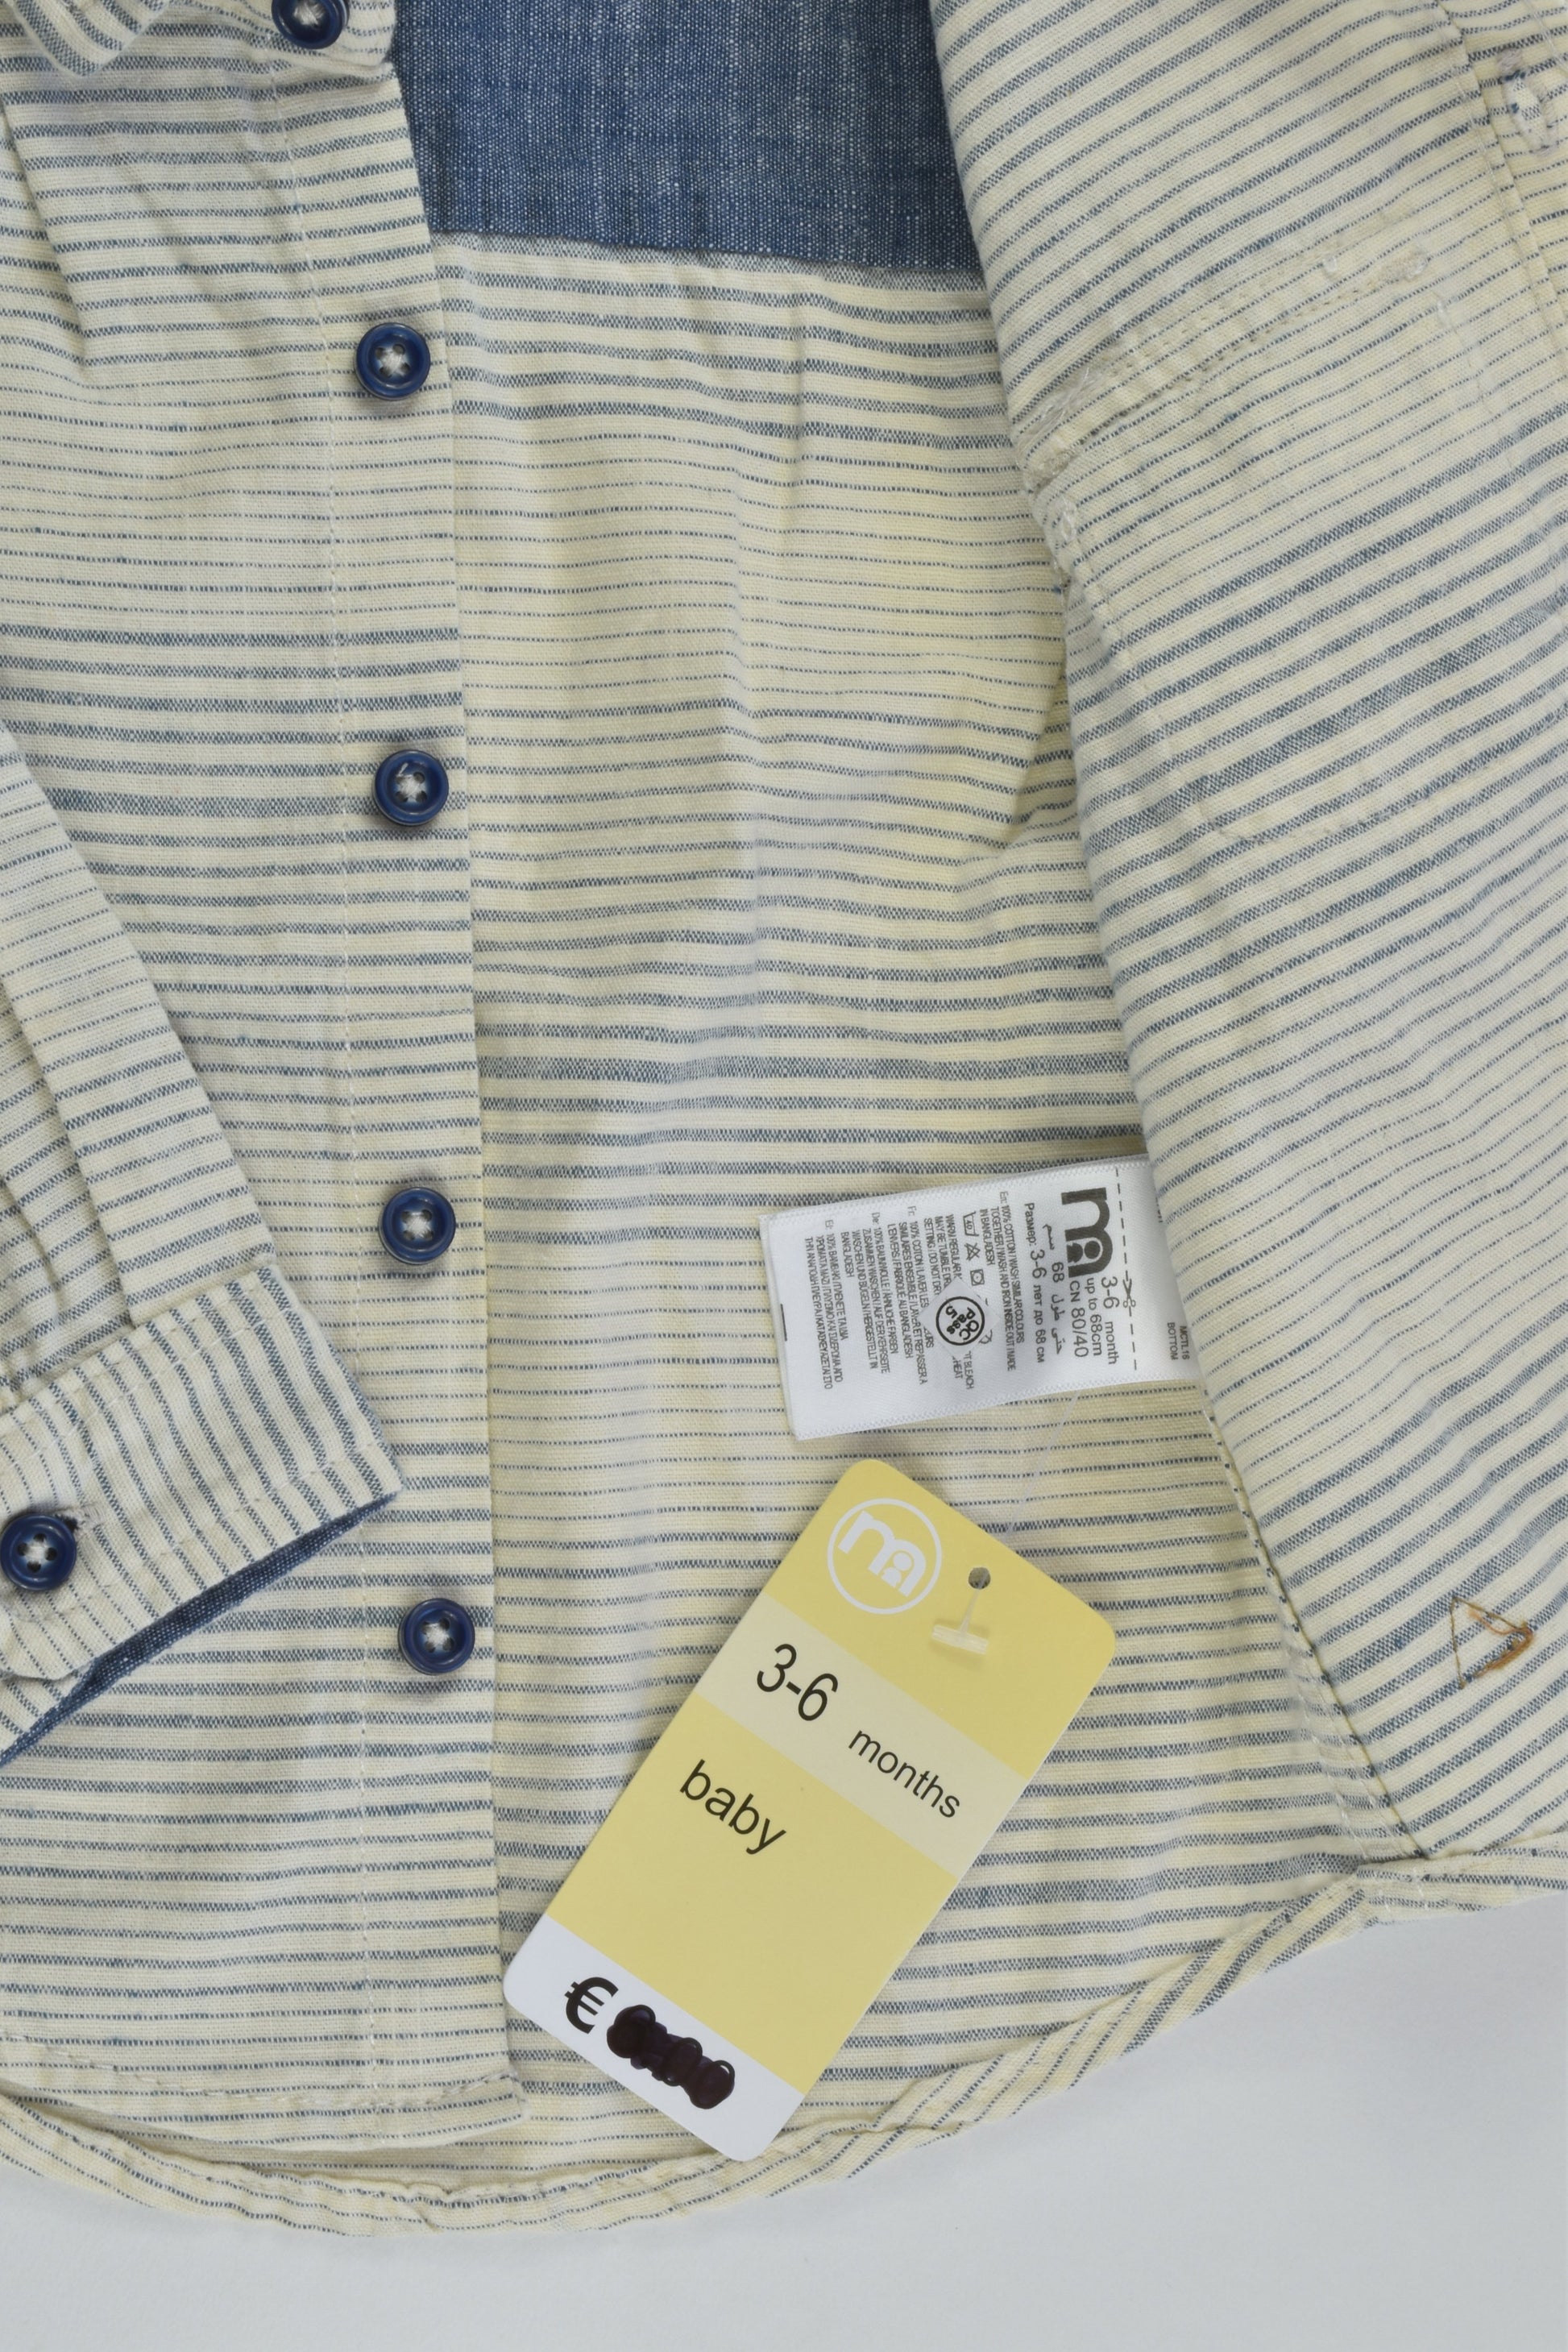 NEW Mothercare Size 00 (3-6 months) Shirt